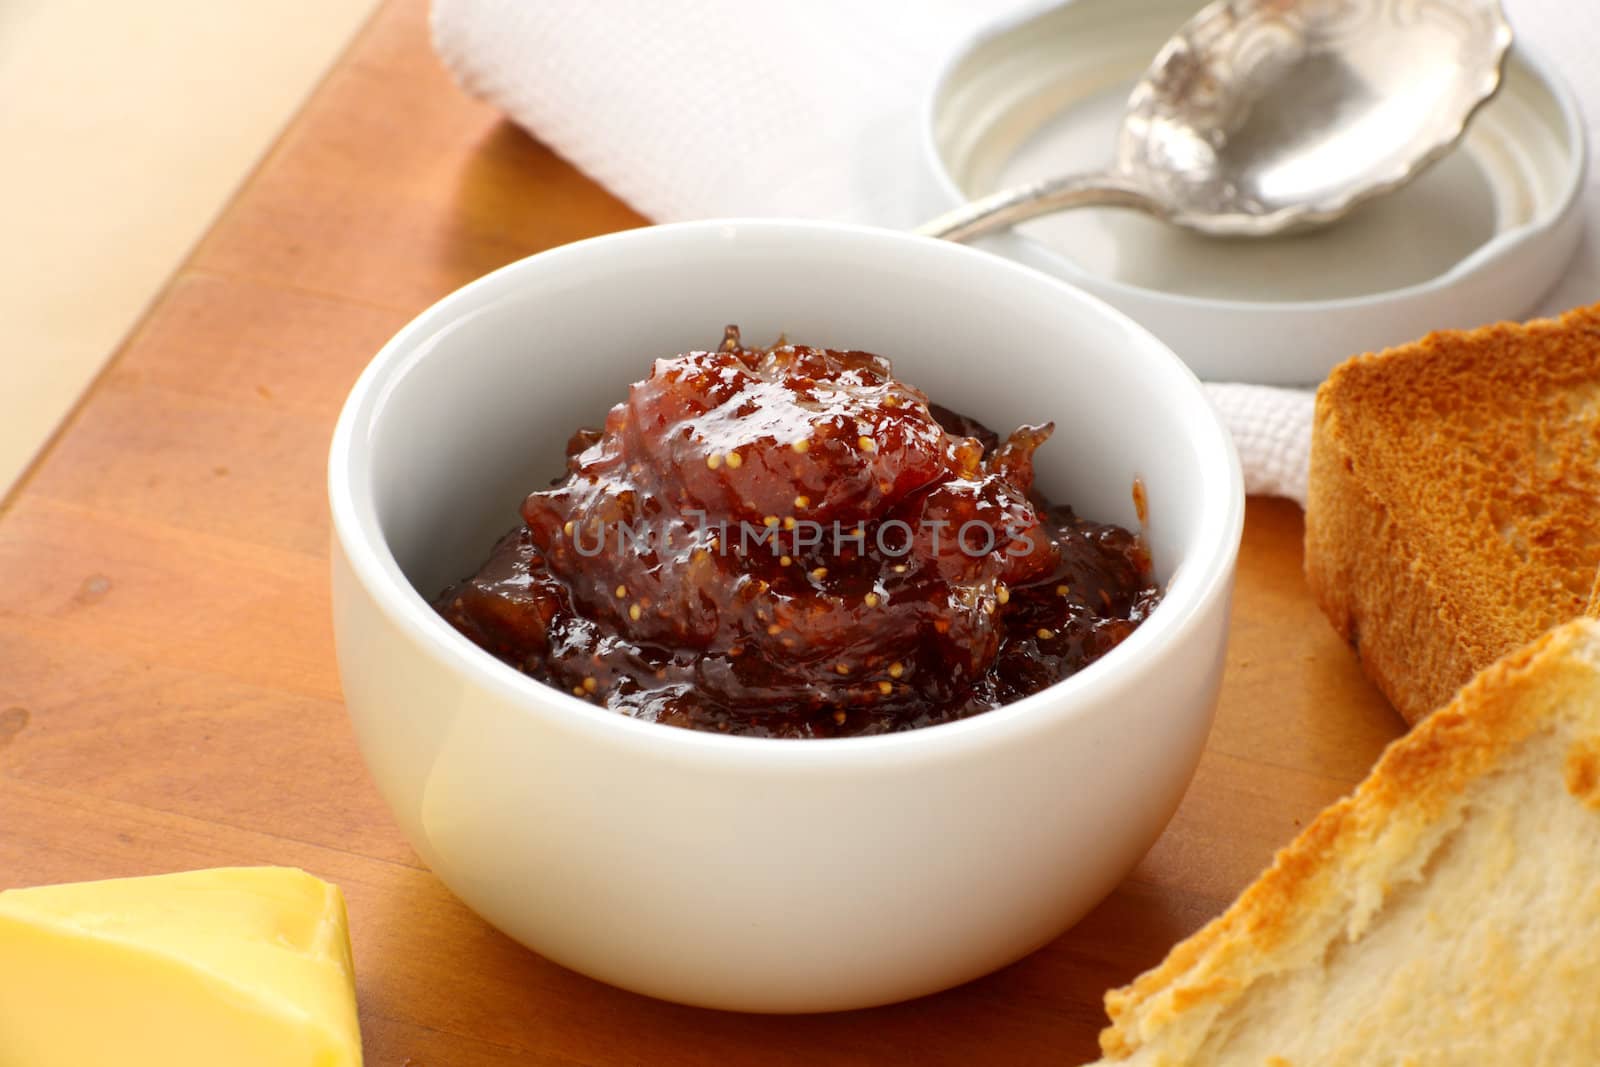 Delicious fresh homemade fig jam ready to spread on bread.